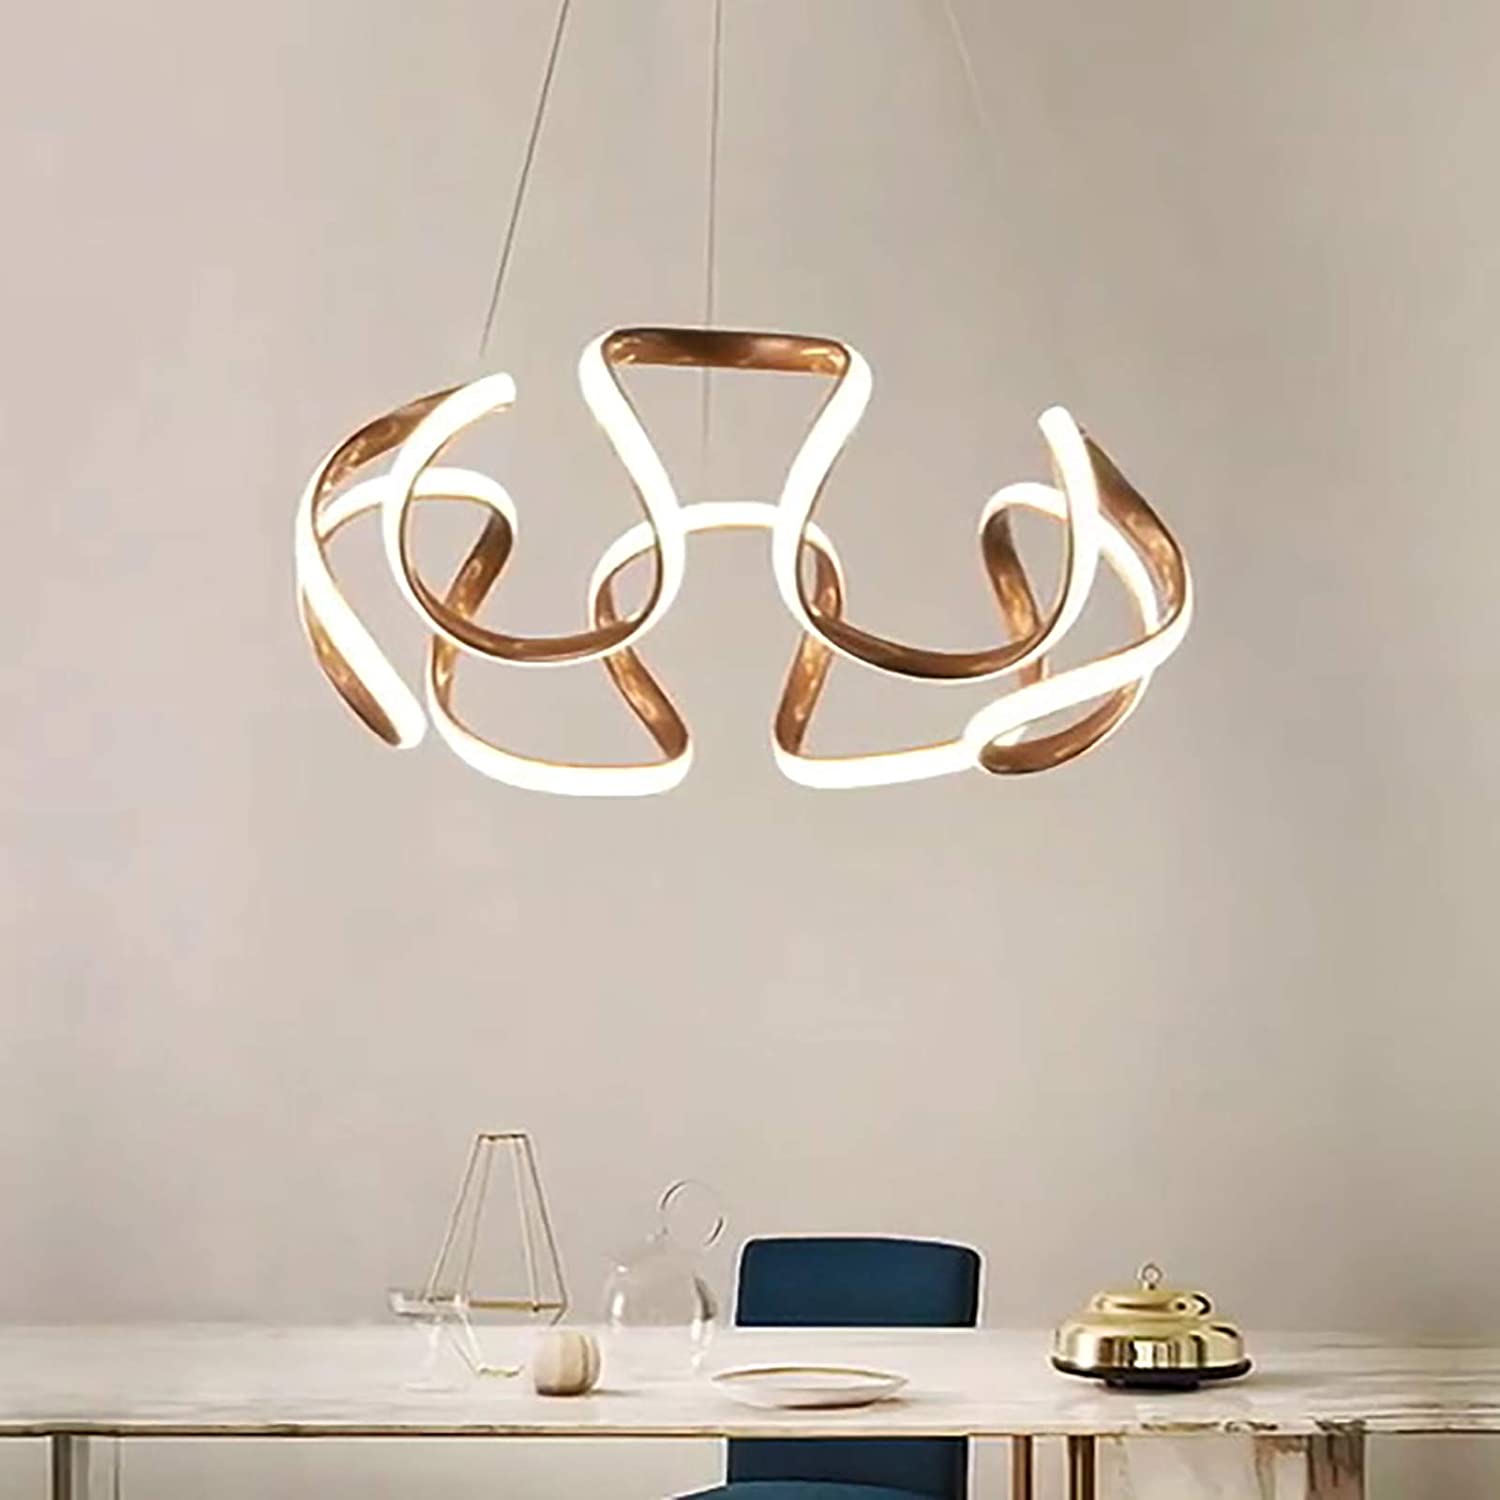 MONIPA LED Ceiling Light Fixture Modern Champagne Gold Pendant Light Stepless Dimming with Remote Control for Living Room Dining Kitchen Bar Table Lamp - image 4 of 7